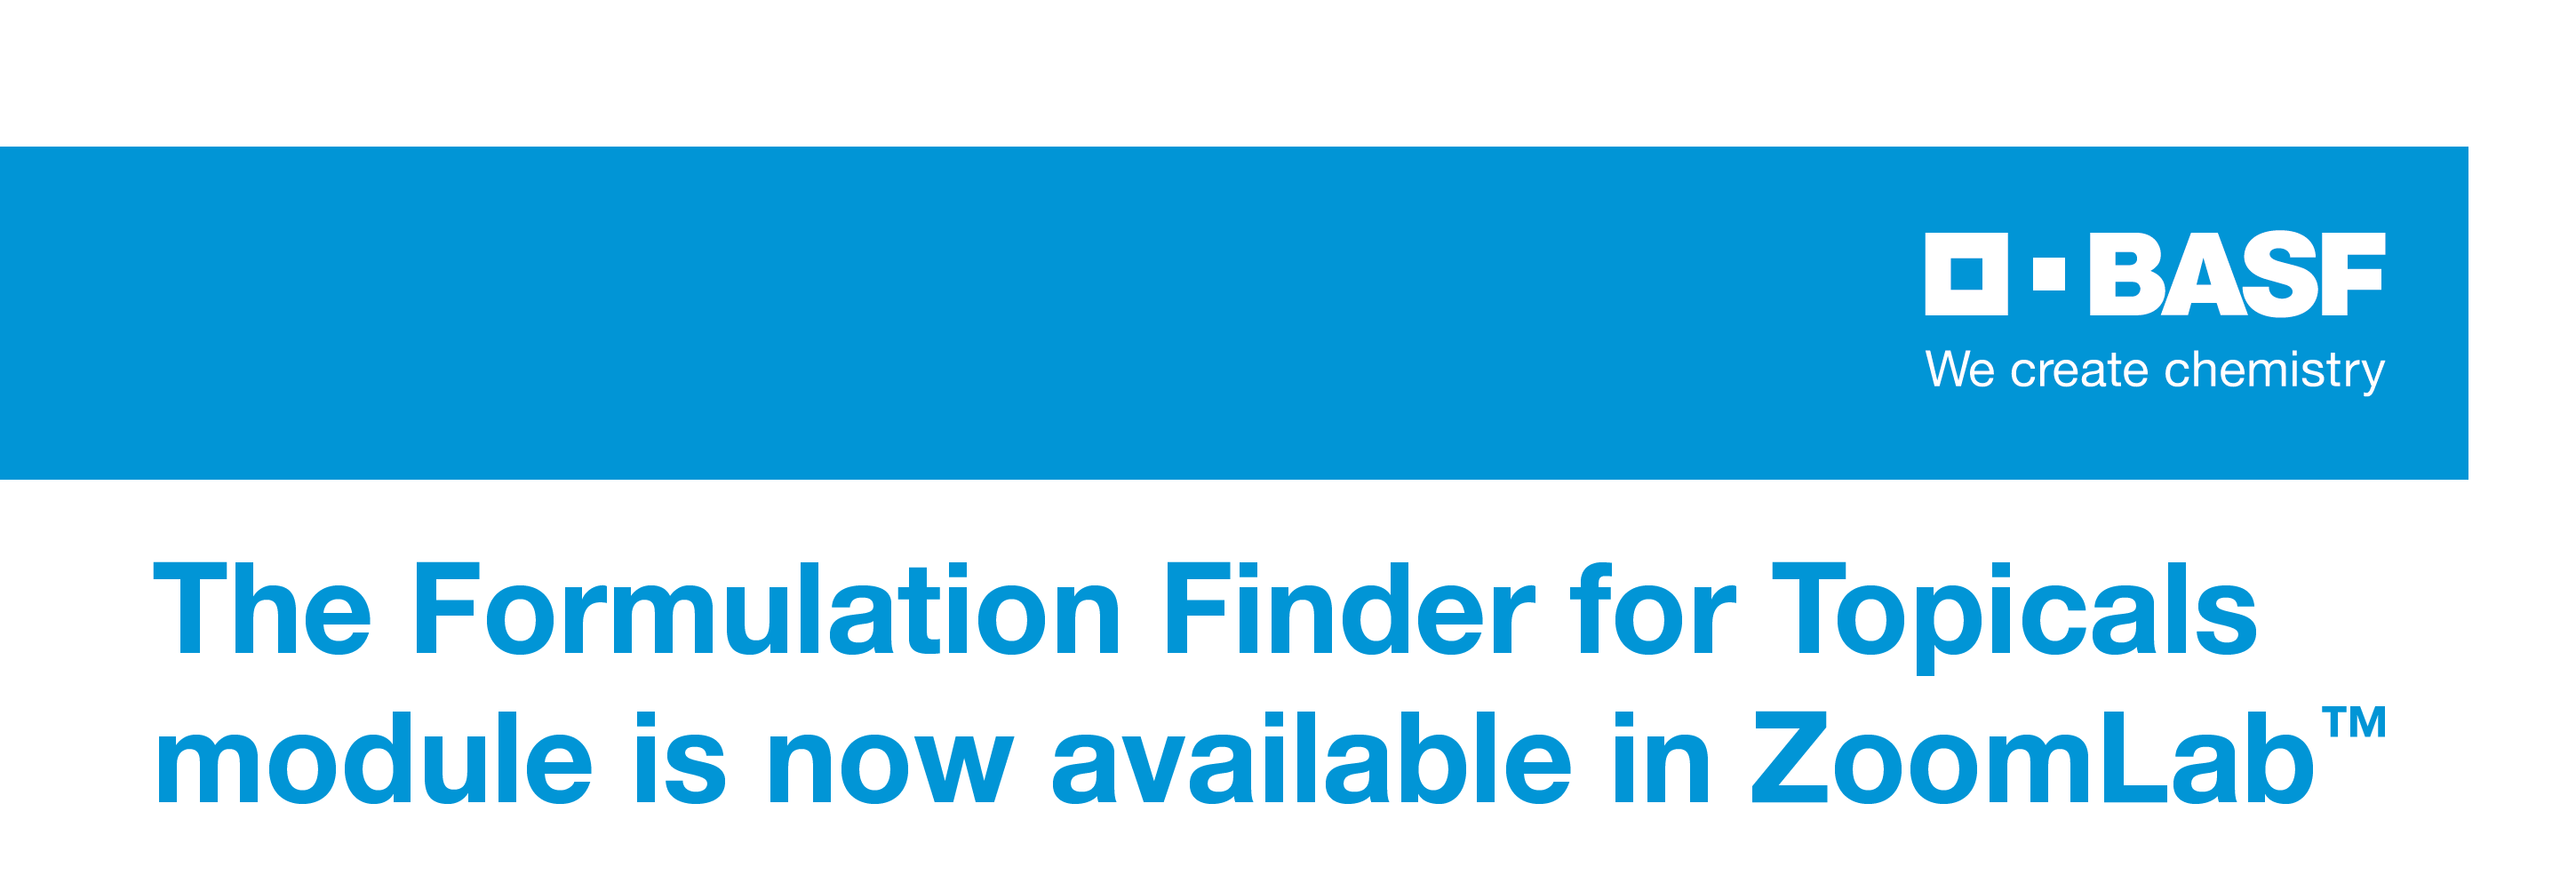 The Formulation Finder for Topicals module is now available in ZoomLab™